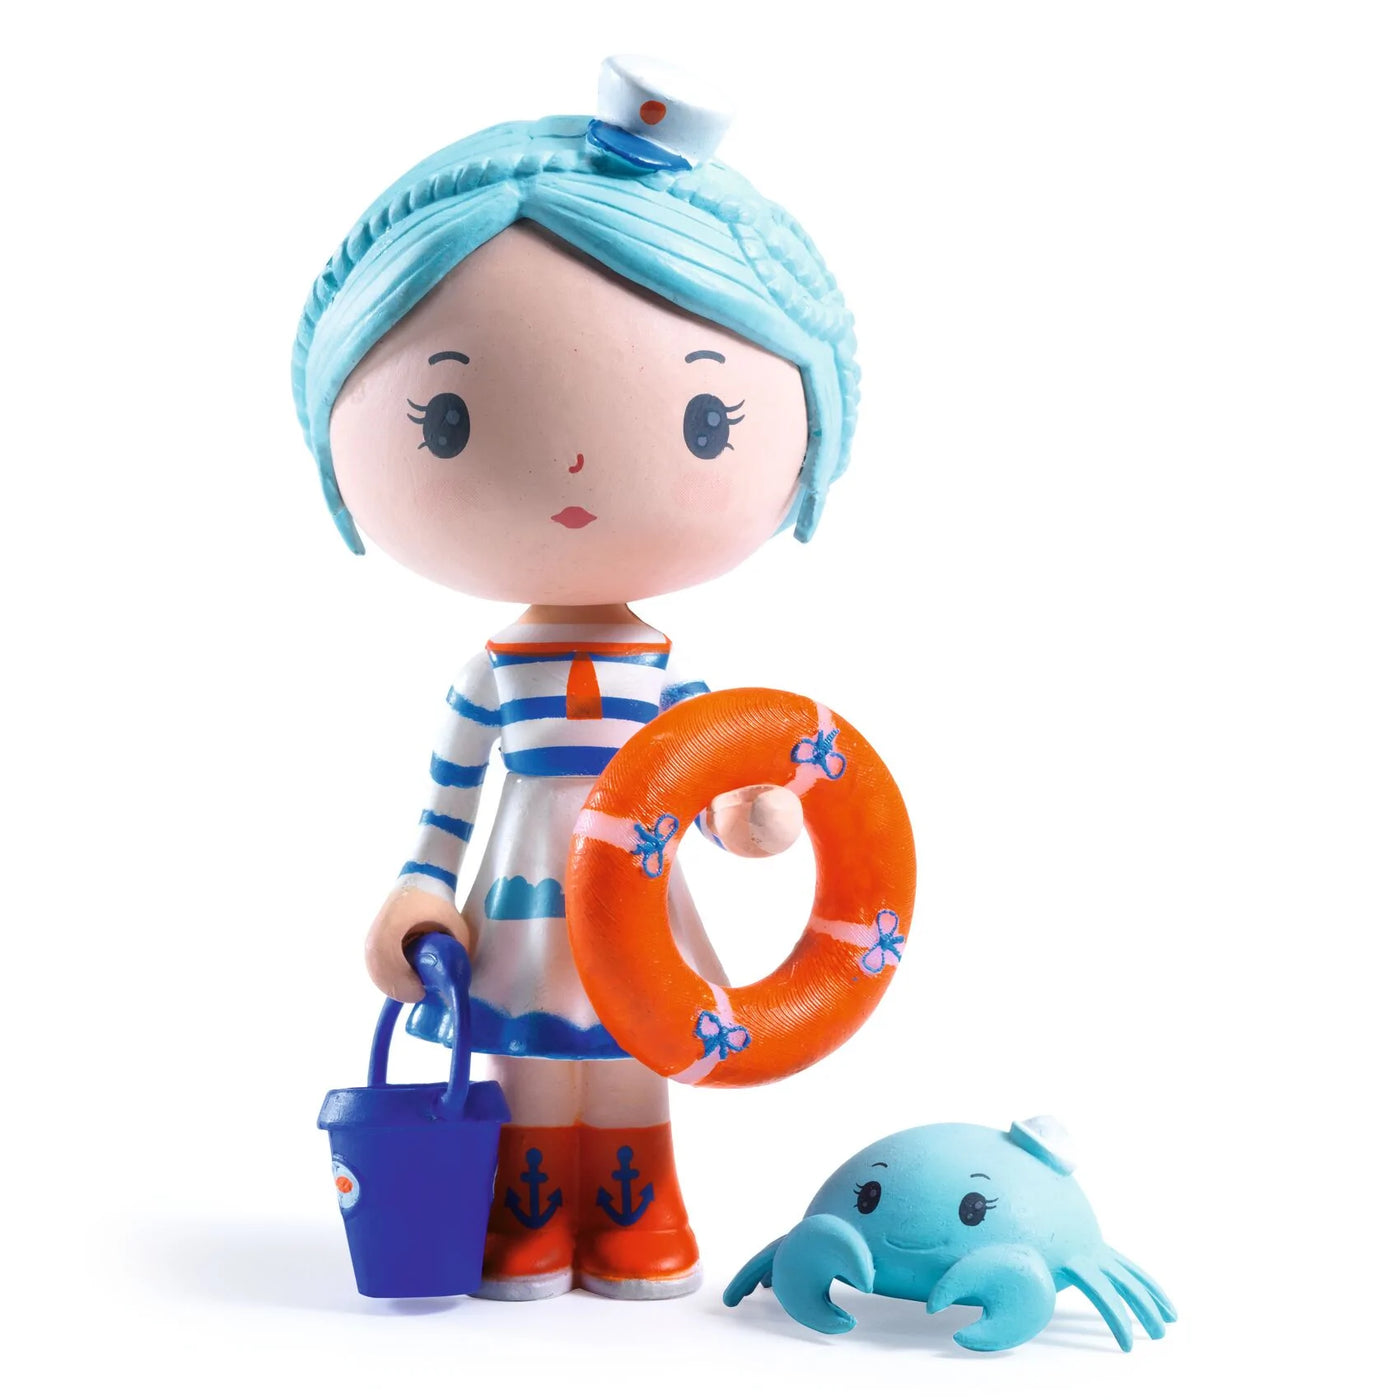 Toys And Games - Imaginary World - Tinyly Marinette & Scouic